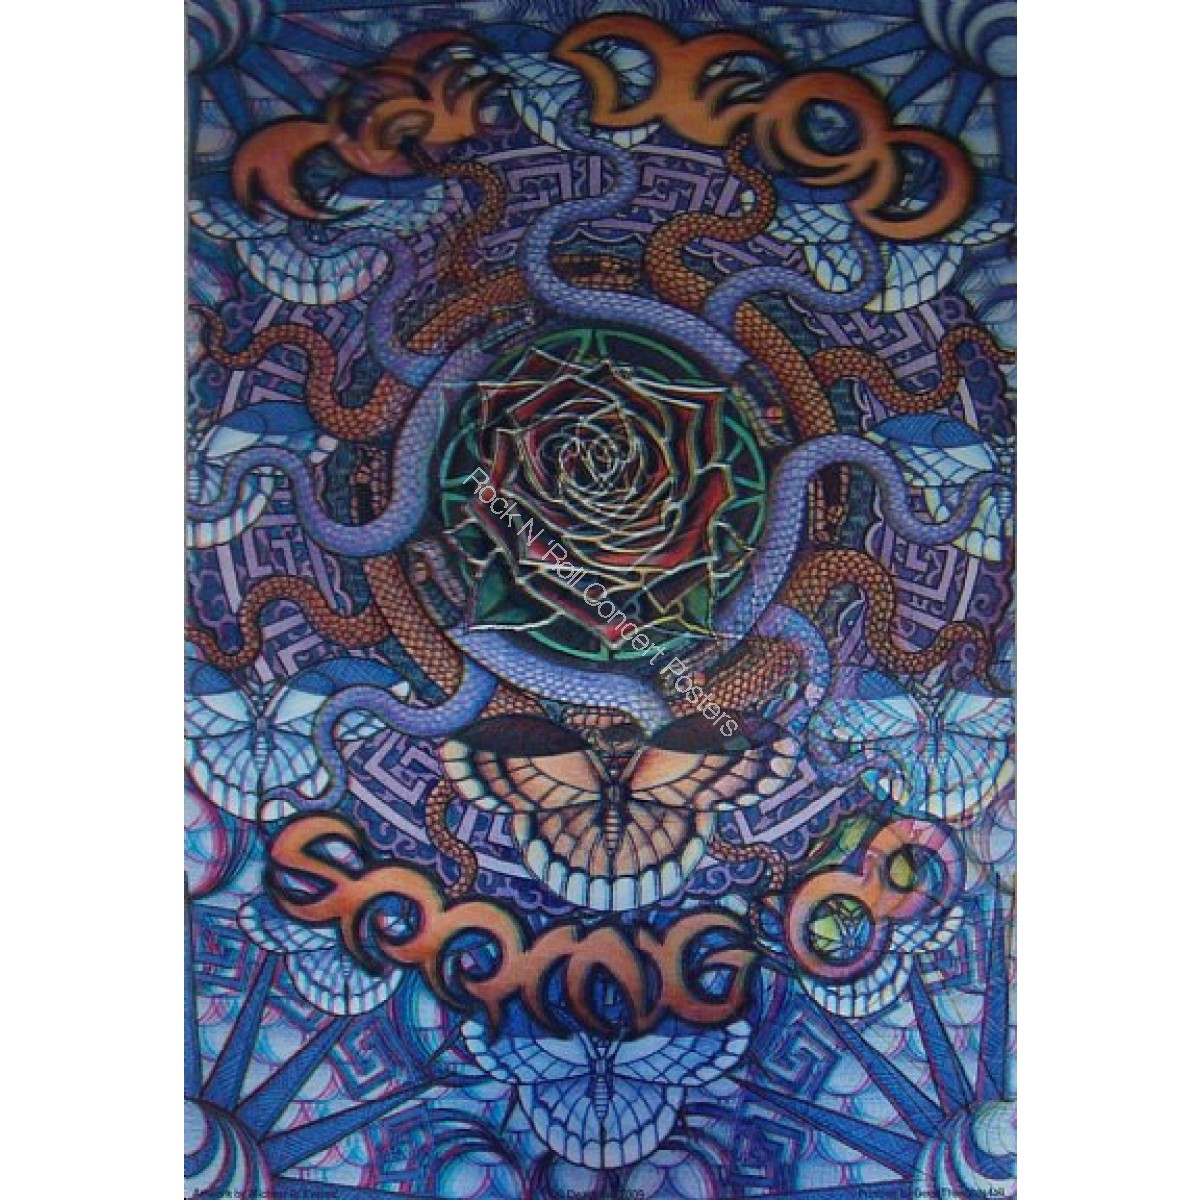 The Dead Spring Tour 2009  3-D Lenticular Poster By Michael Everett 1st Edition 